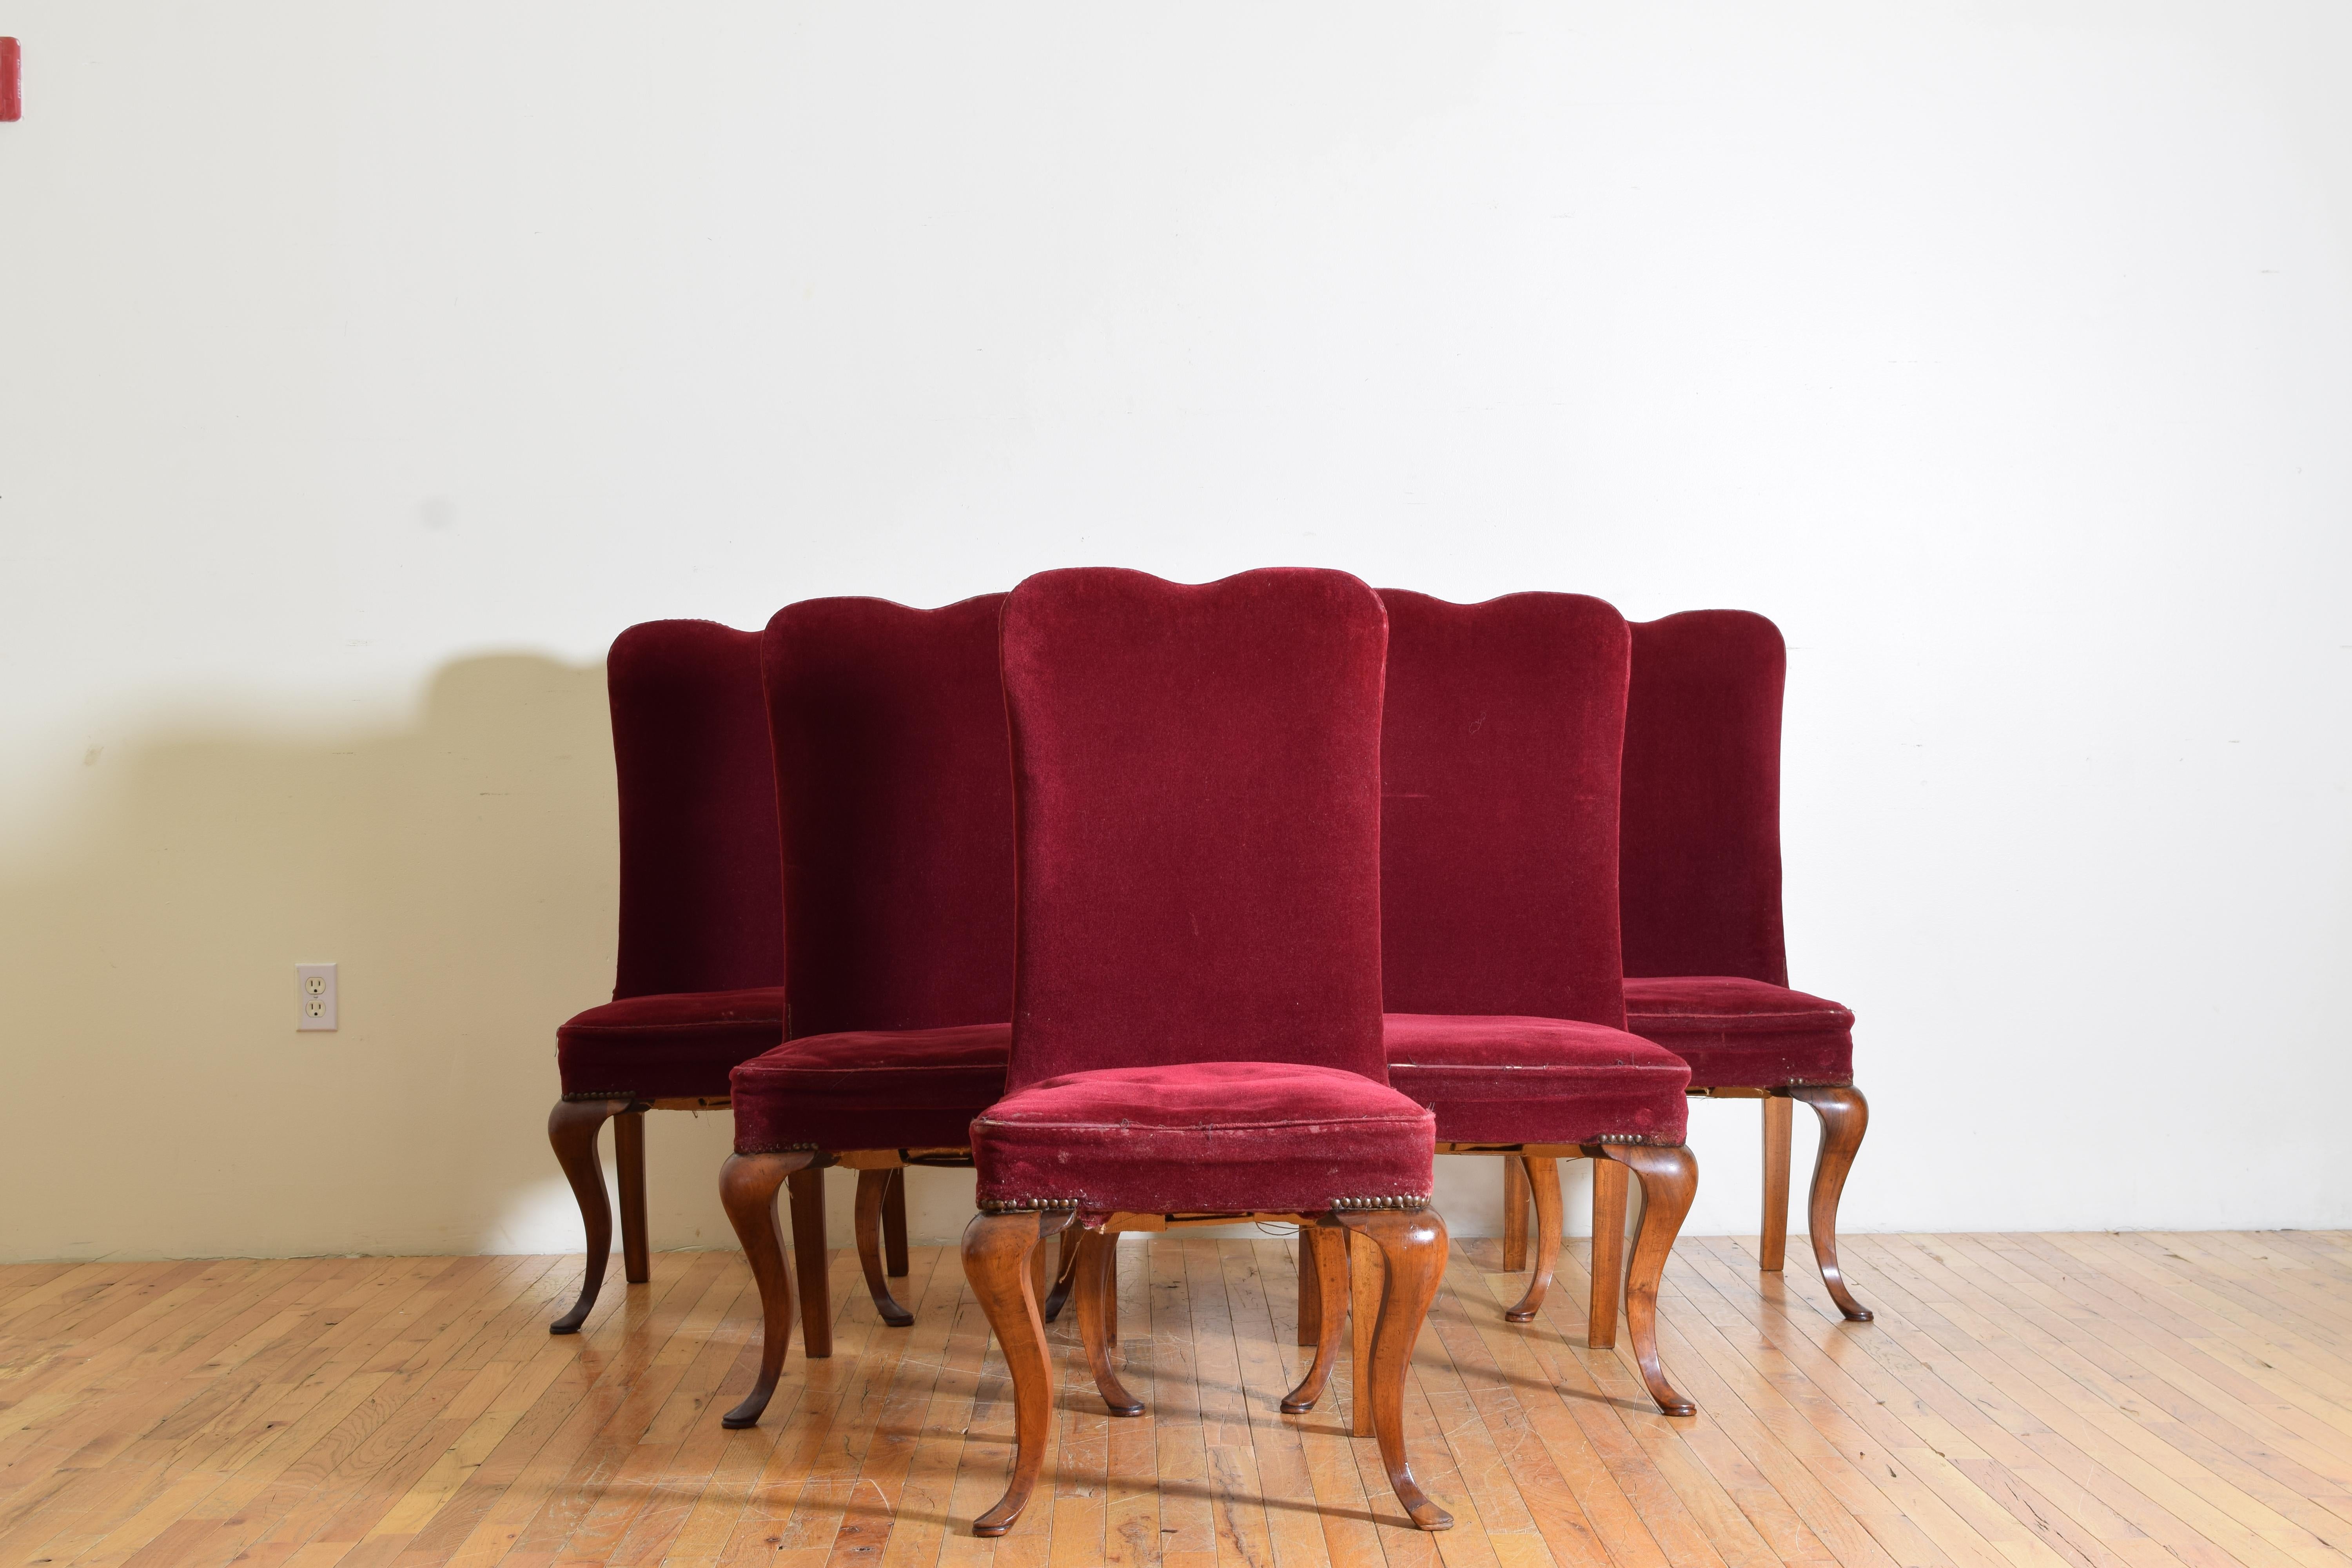 Queen Anne Set of 6 Italian Q. Anne Style Shaped Walnut & Upholstered Dining Chairs, 19thc